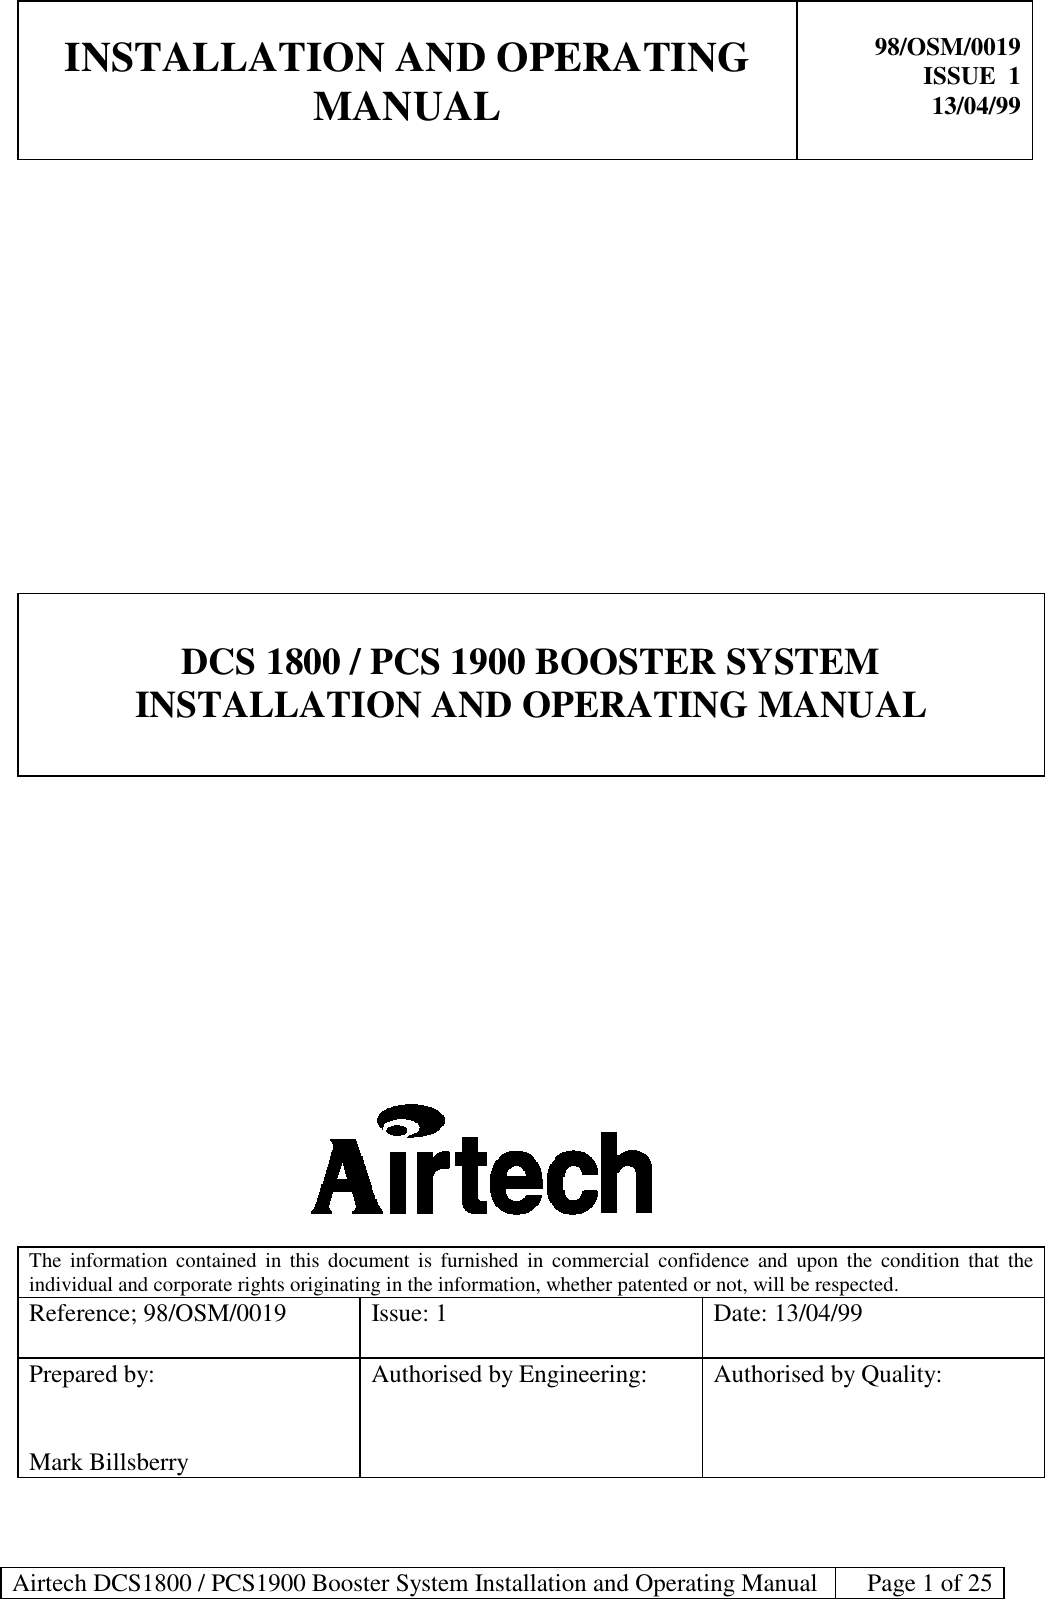 INSTALLATION AND OPERATINGMANUAL98/OSM/0019ISSUE  113/04/99Airtech DCS1800 / PCS1900 Booster System Installation and Operating Manual Page 1 of 25DCS 1800 / PCS 1900 BOOSTER SYSTEMINSTALLATION AND OPERATING MANUALThe information contained in this document is furnished in commercial confidence and upon the condition that theindividual and corporate rights originating in the information, whether patented or not, will be respected.Reference; 98/OSM/0019 Issue: 1 Date: 13/04/99Prepared by:Mark BillsberryAuthorised by Engineering: Authorised by Quality: